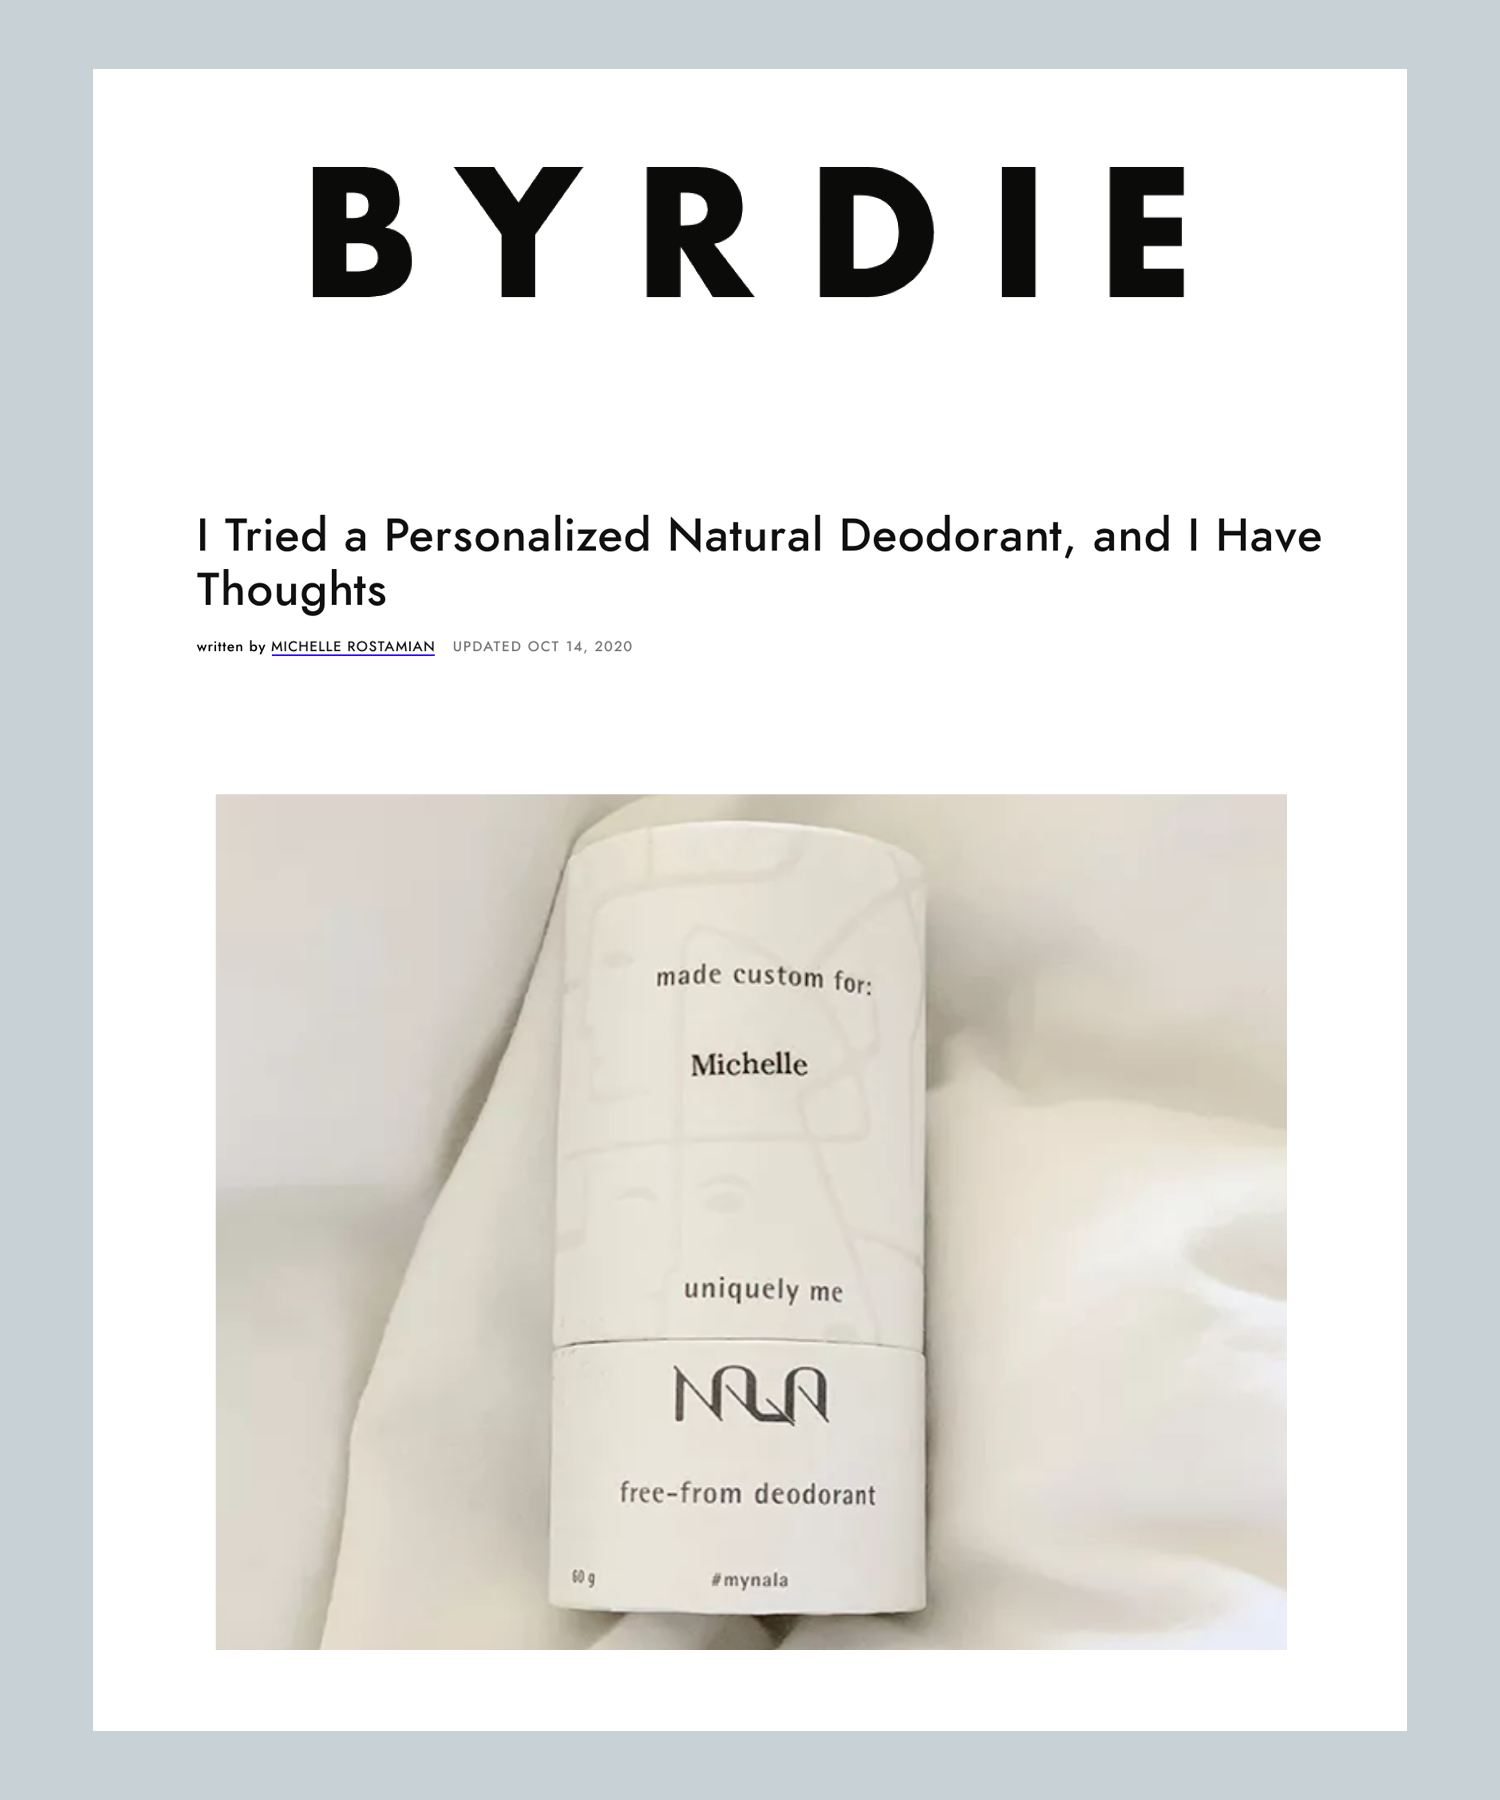 Byrdie: I Tried a Personalized Natural Deodorant, and I Have Thoughts